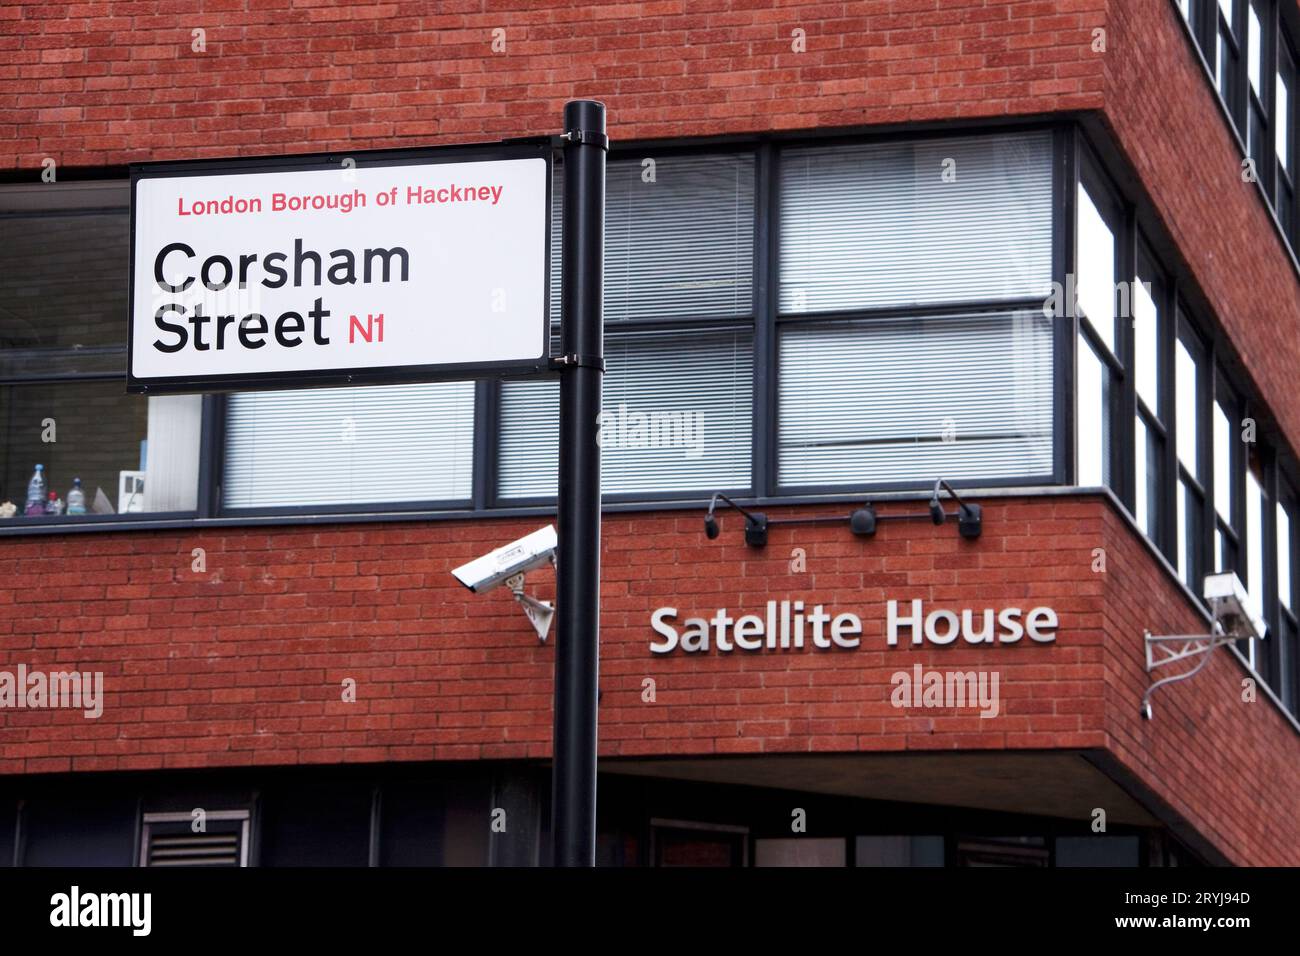 Corsham Street sign in London Borough of Hackney with Satellite House in the background and group 4 CCTV camera visible Stock Photo